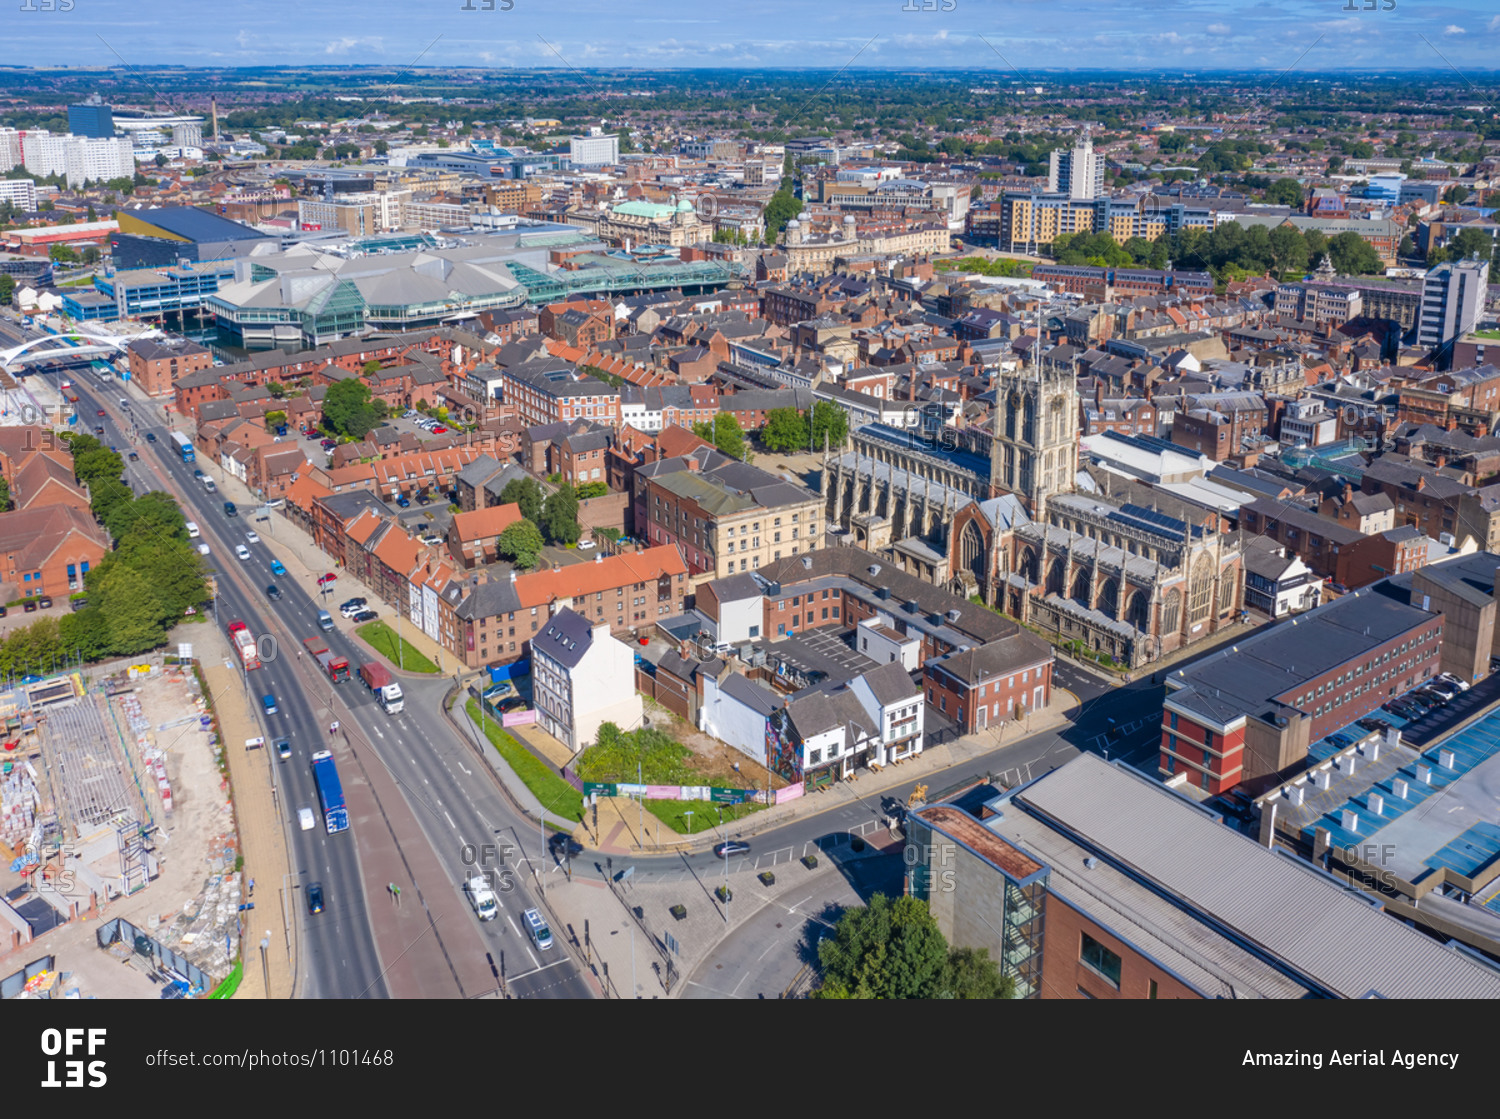 Aerial view of the city of Hull with the Hull Minster parish church in the background, United Kingdom.